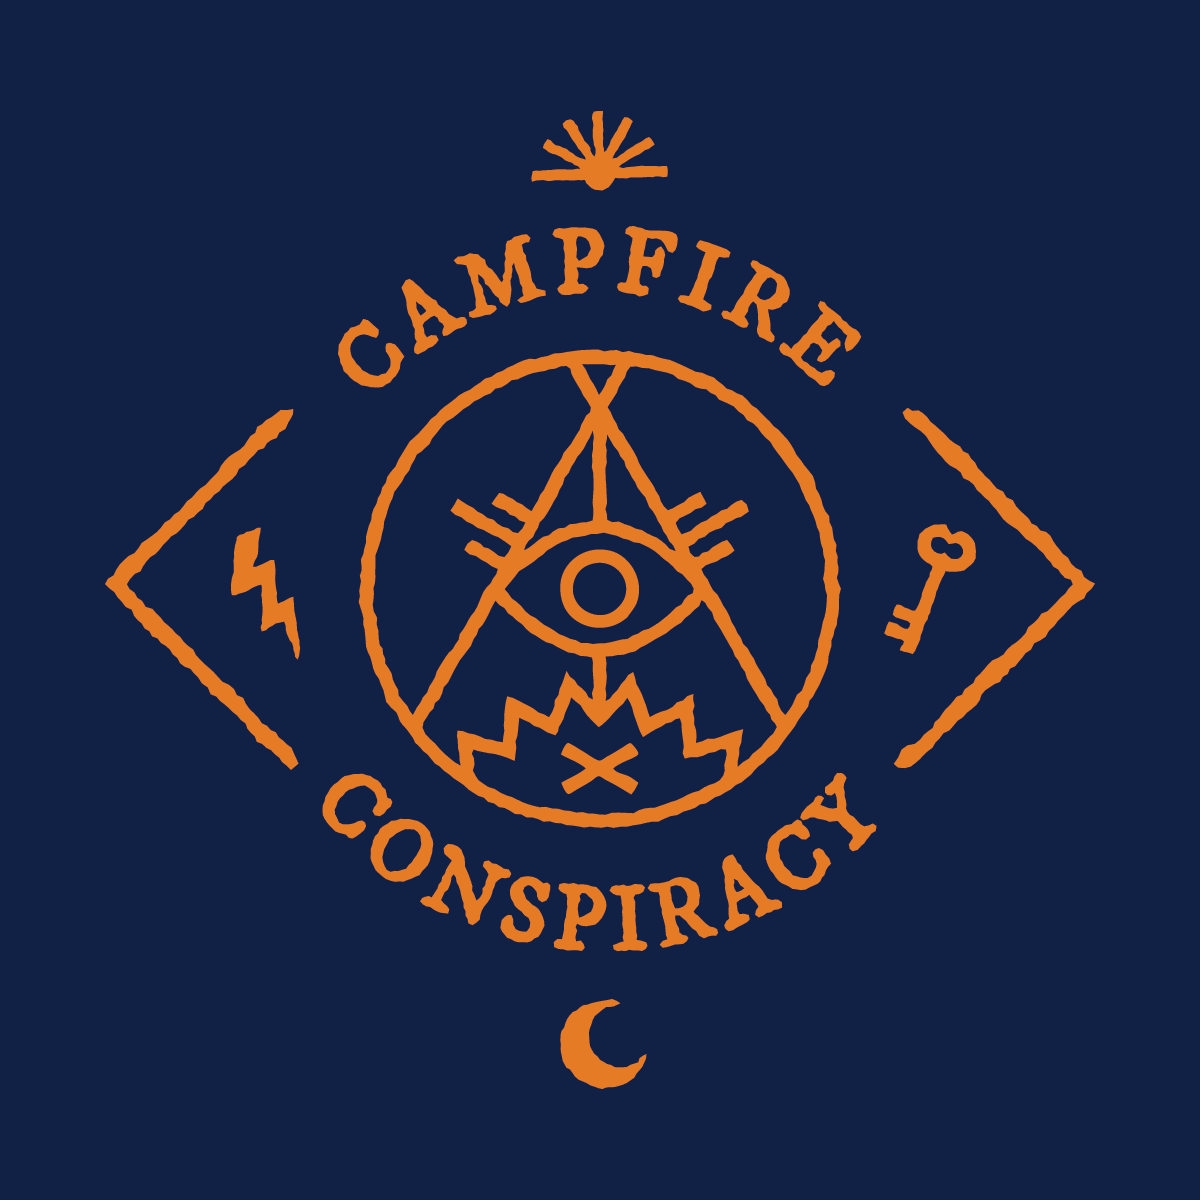 Conspiracy Logo - How to Design an Iconic and Memorable Band Logo - Go Media ...